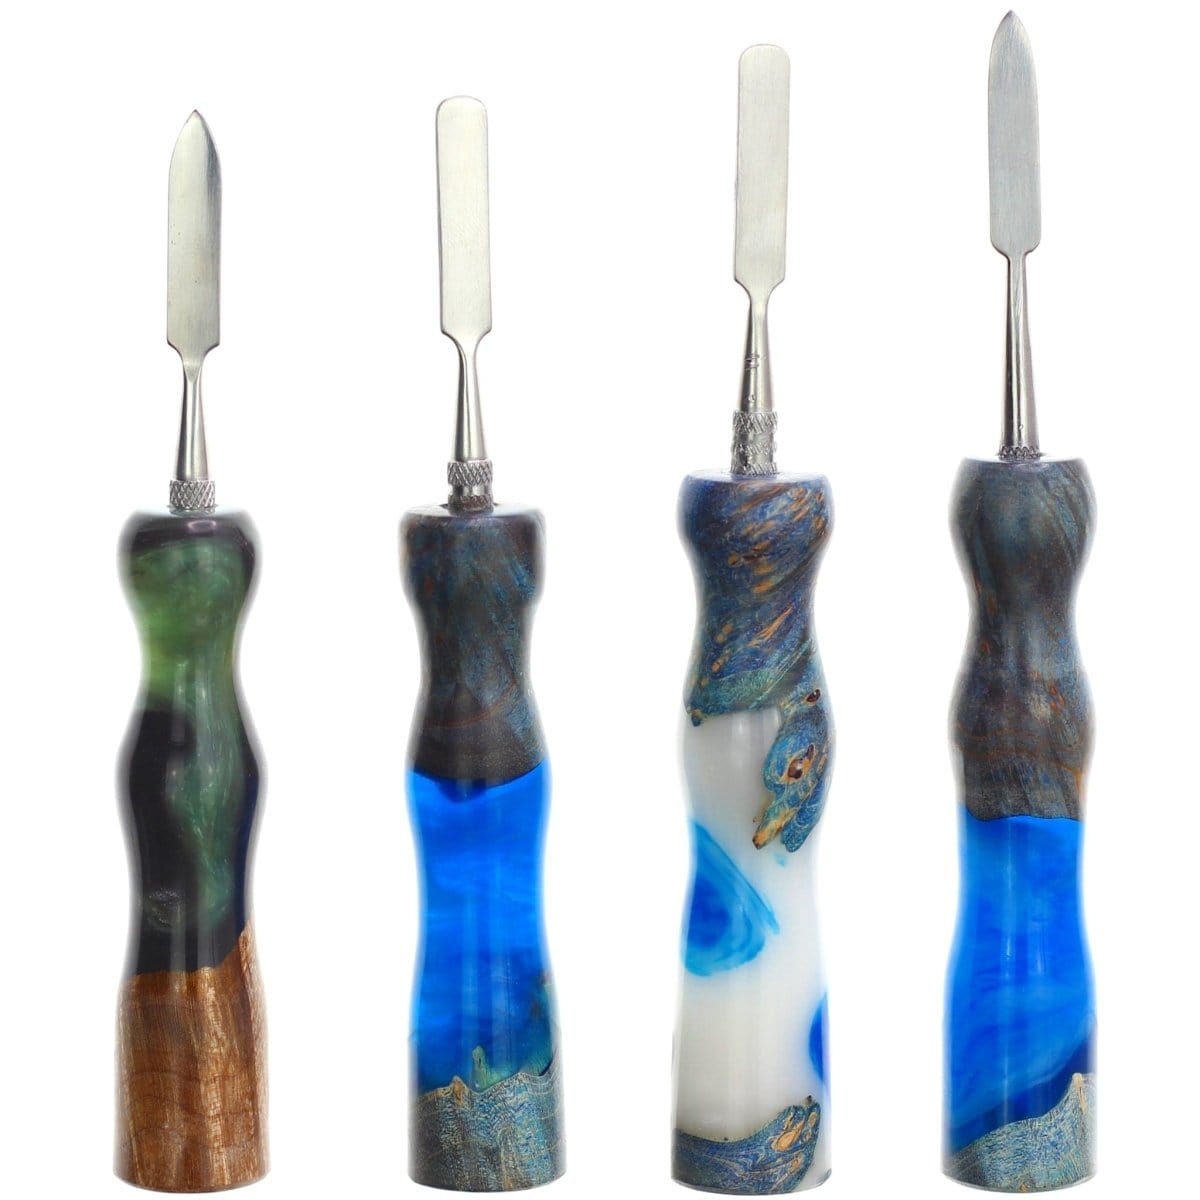 Galactic Crafts Accessory Wood Worked Resin Dab Tool